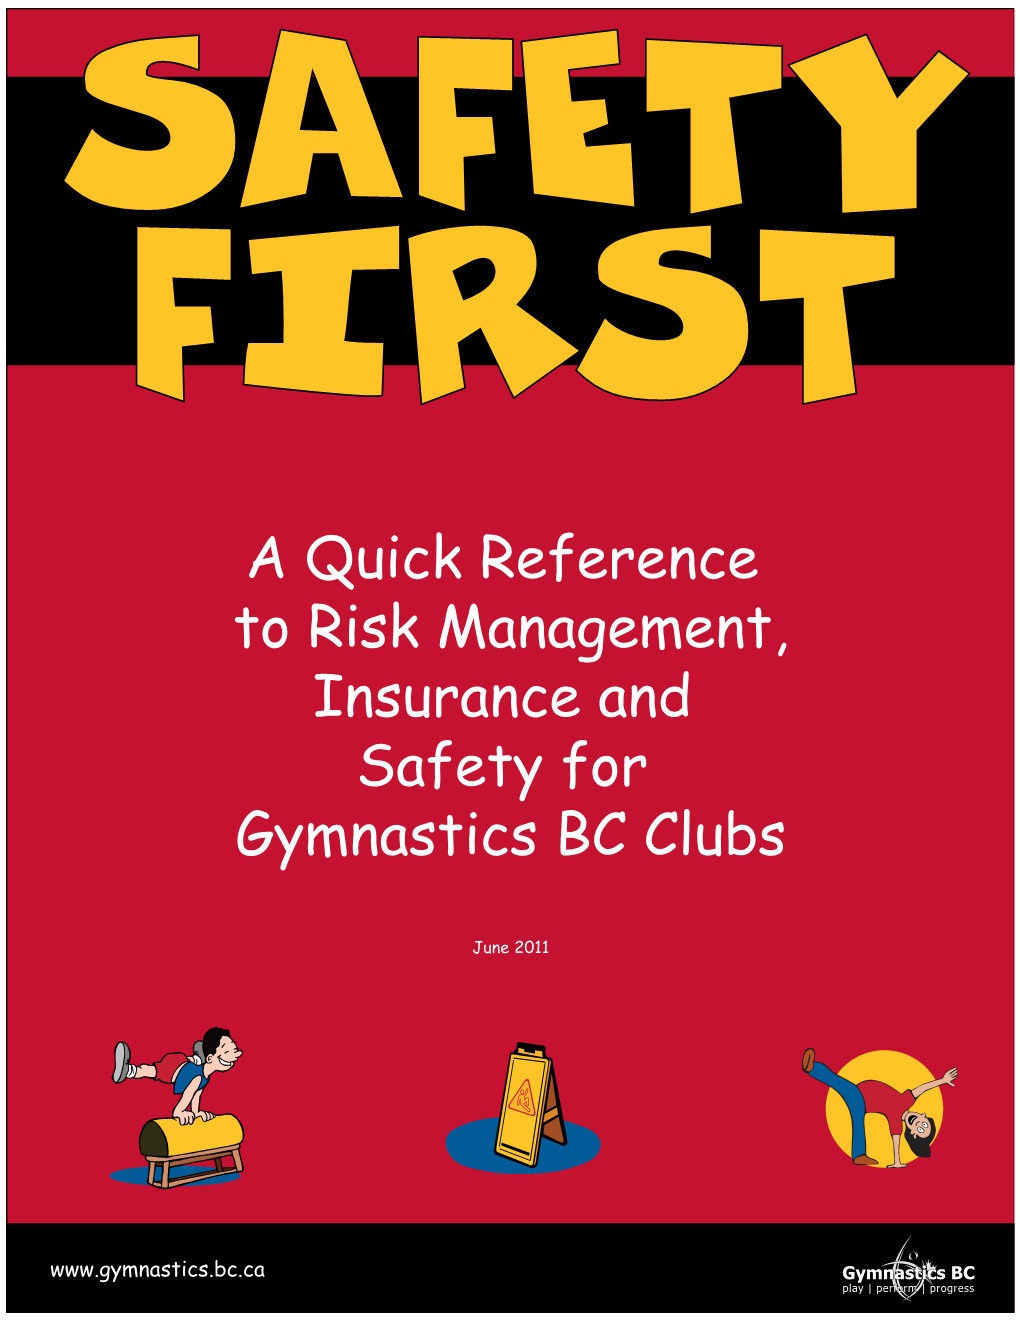 A Quick Reference to Risk Management, Insurance and Safety for Gymnastics BC Clubs